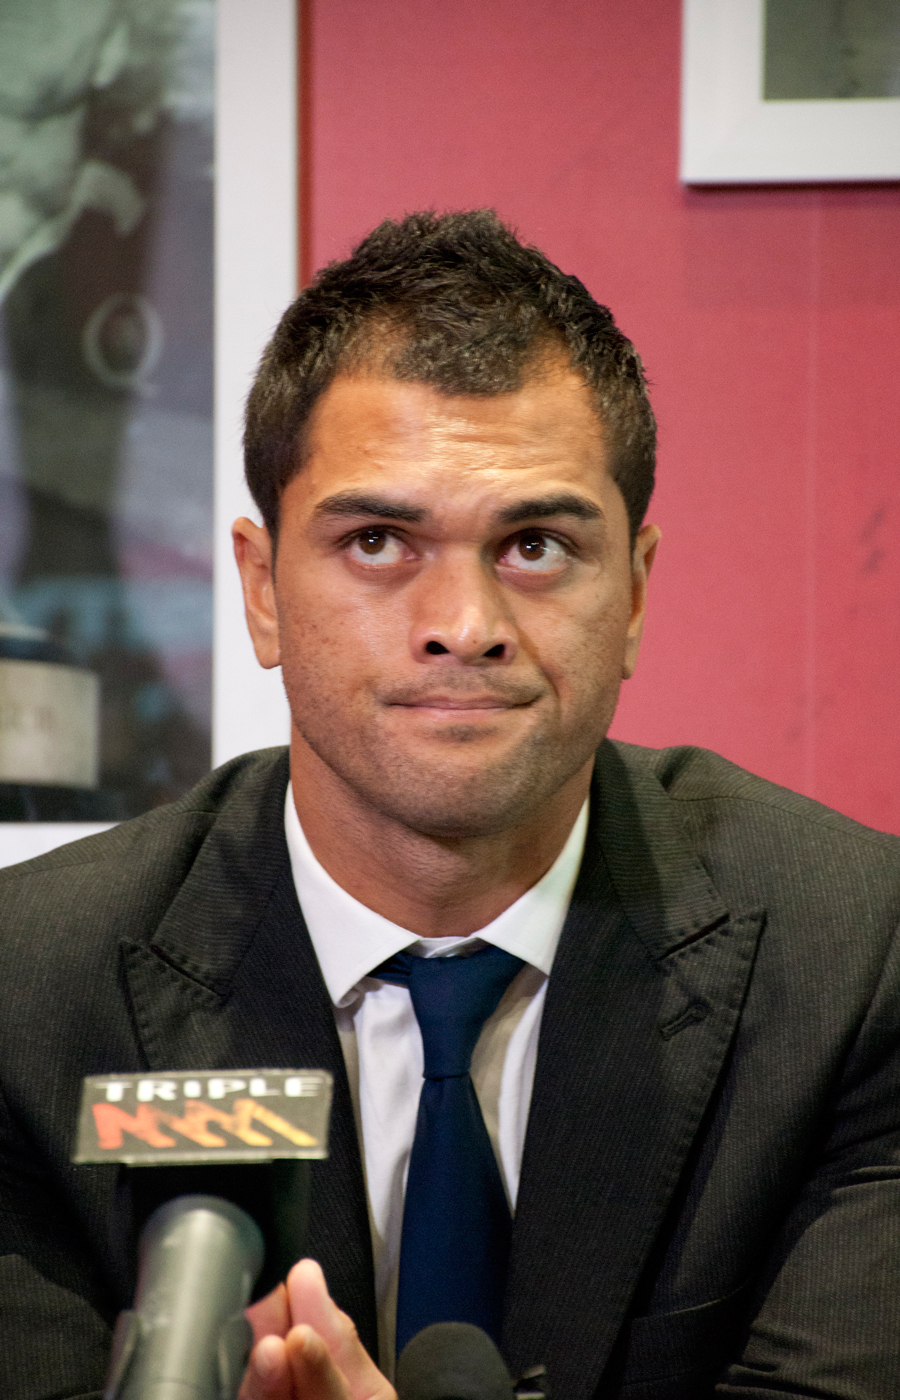 The Reds' Karmichael Hunt speaks to the media